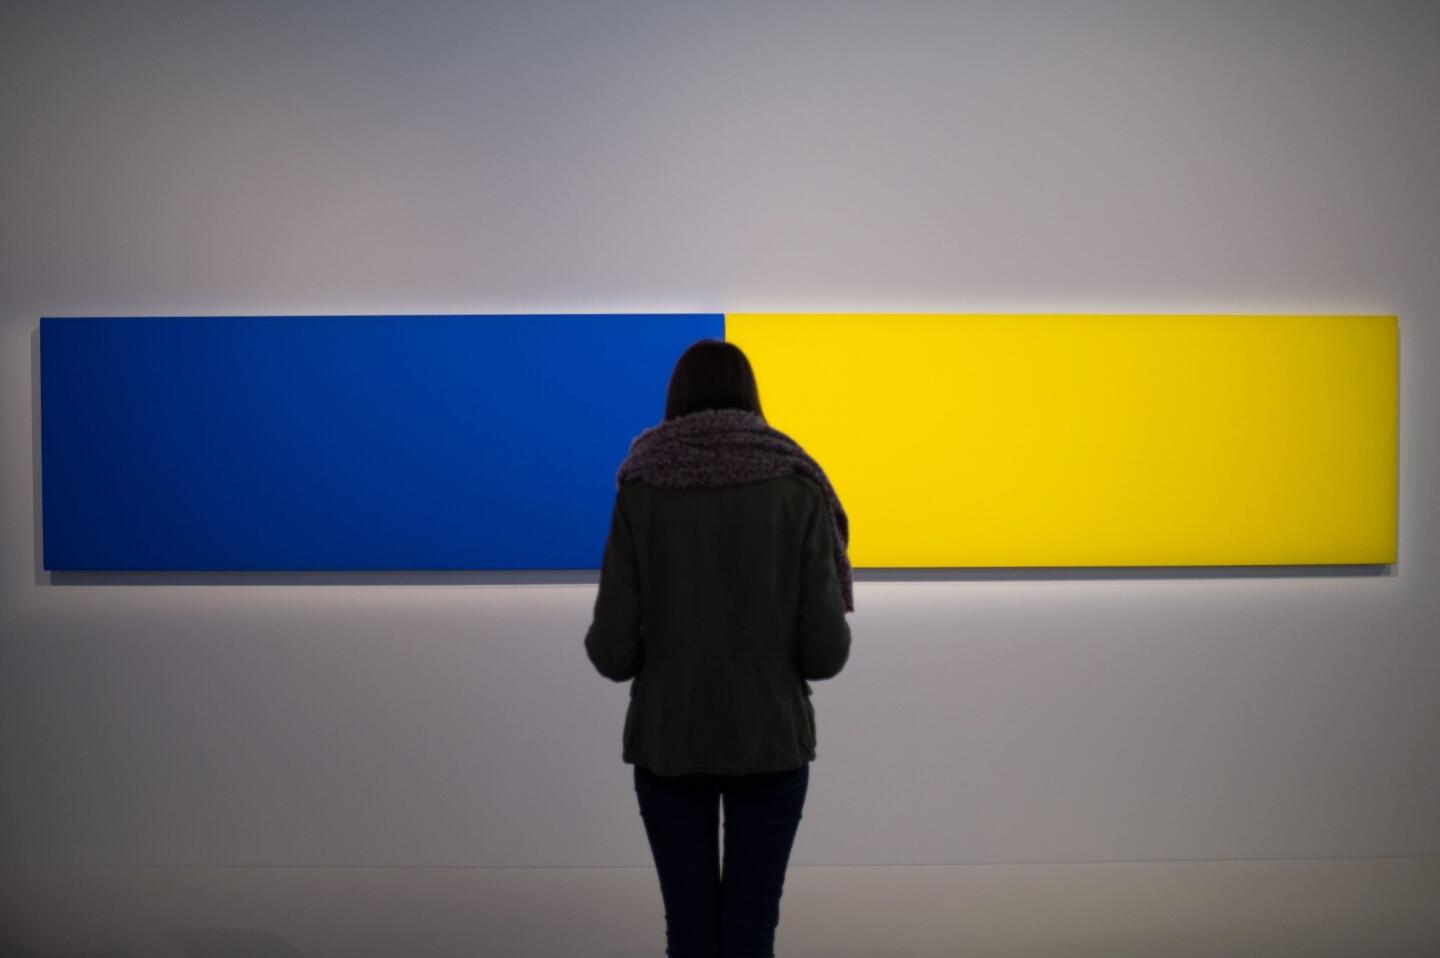 A visitor looks at the artwork "Two Panels - Blue-Yellow" (1970) by artist Ellsworth Kelly as part of the exhibition "J'aime les panoramas" (I love the panoramas) at the Museum of European and Mediterranean Civilisations (MUCEM) in Marseille, France in November 2015.